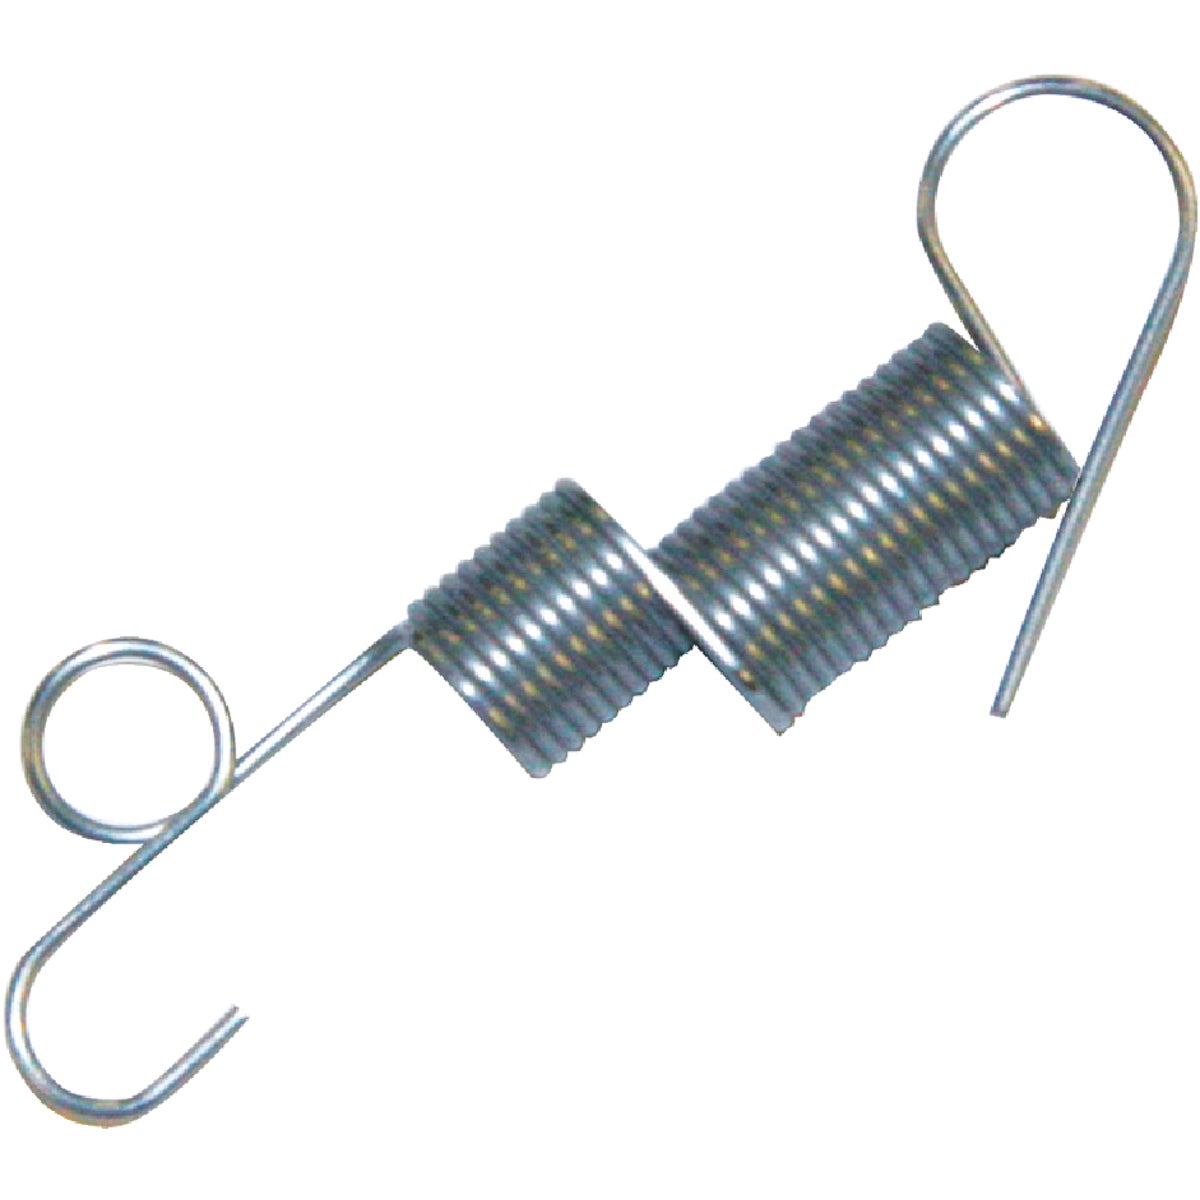 Item 502041, Halo replacement tension springs. Replacement kit of coil springs.